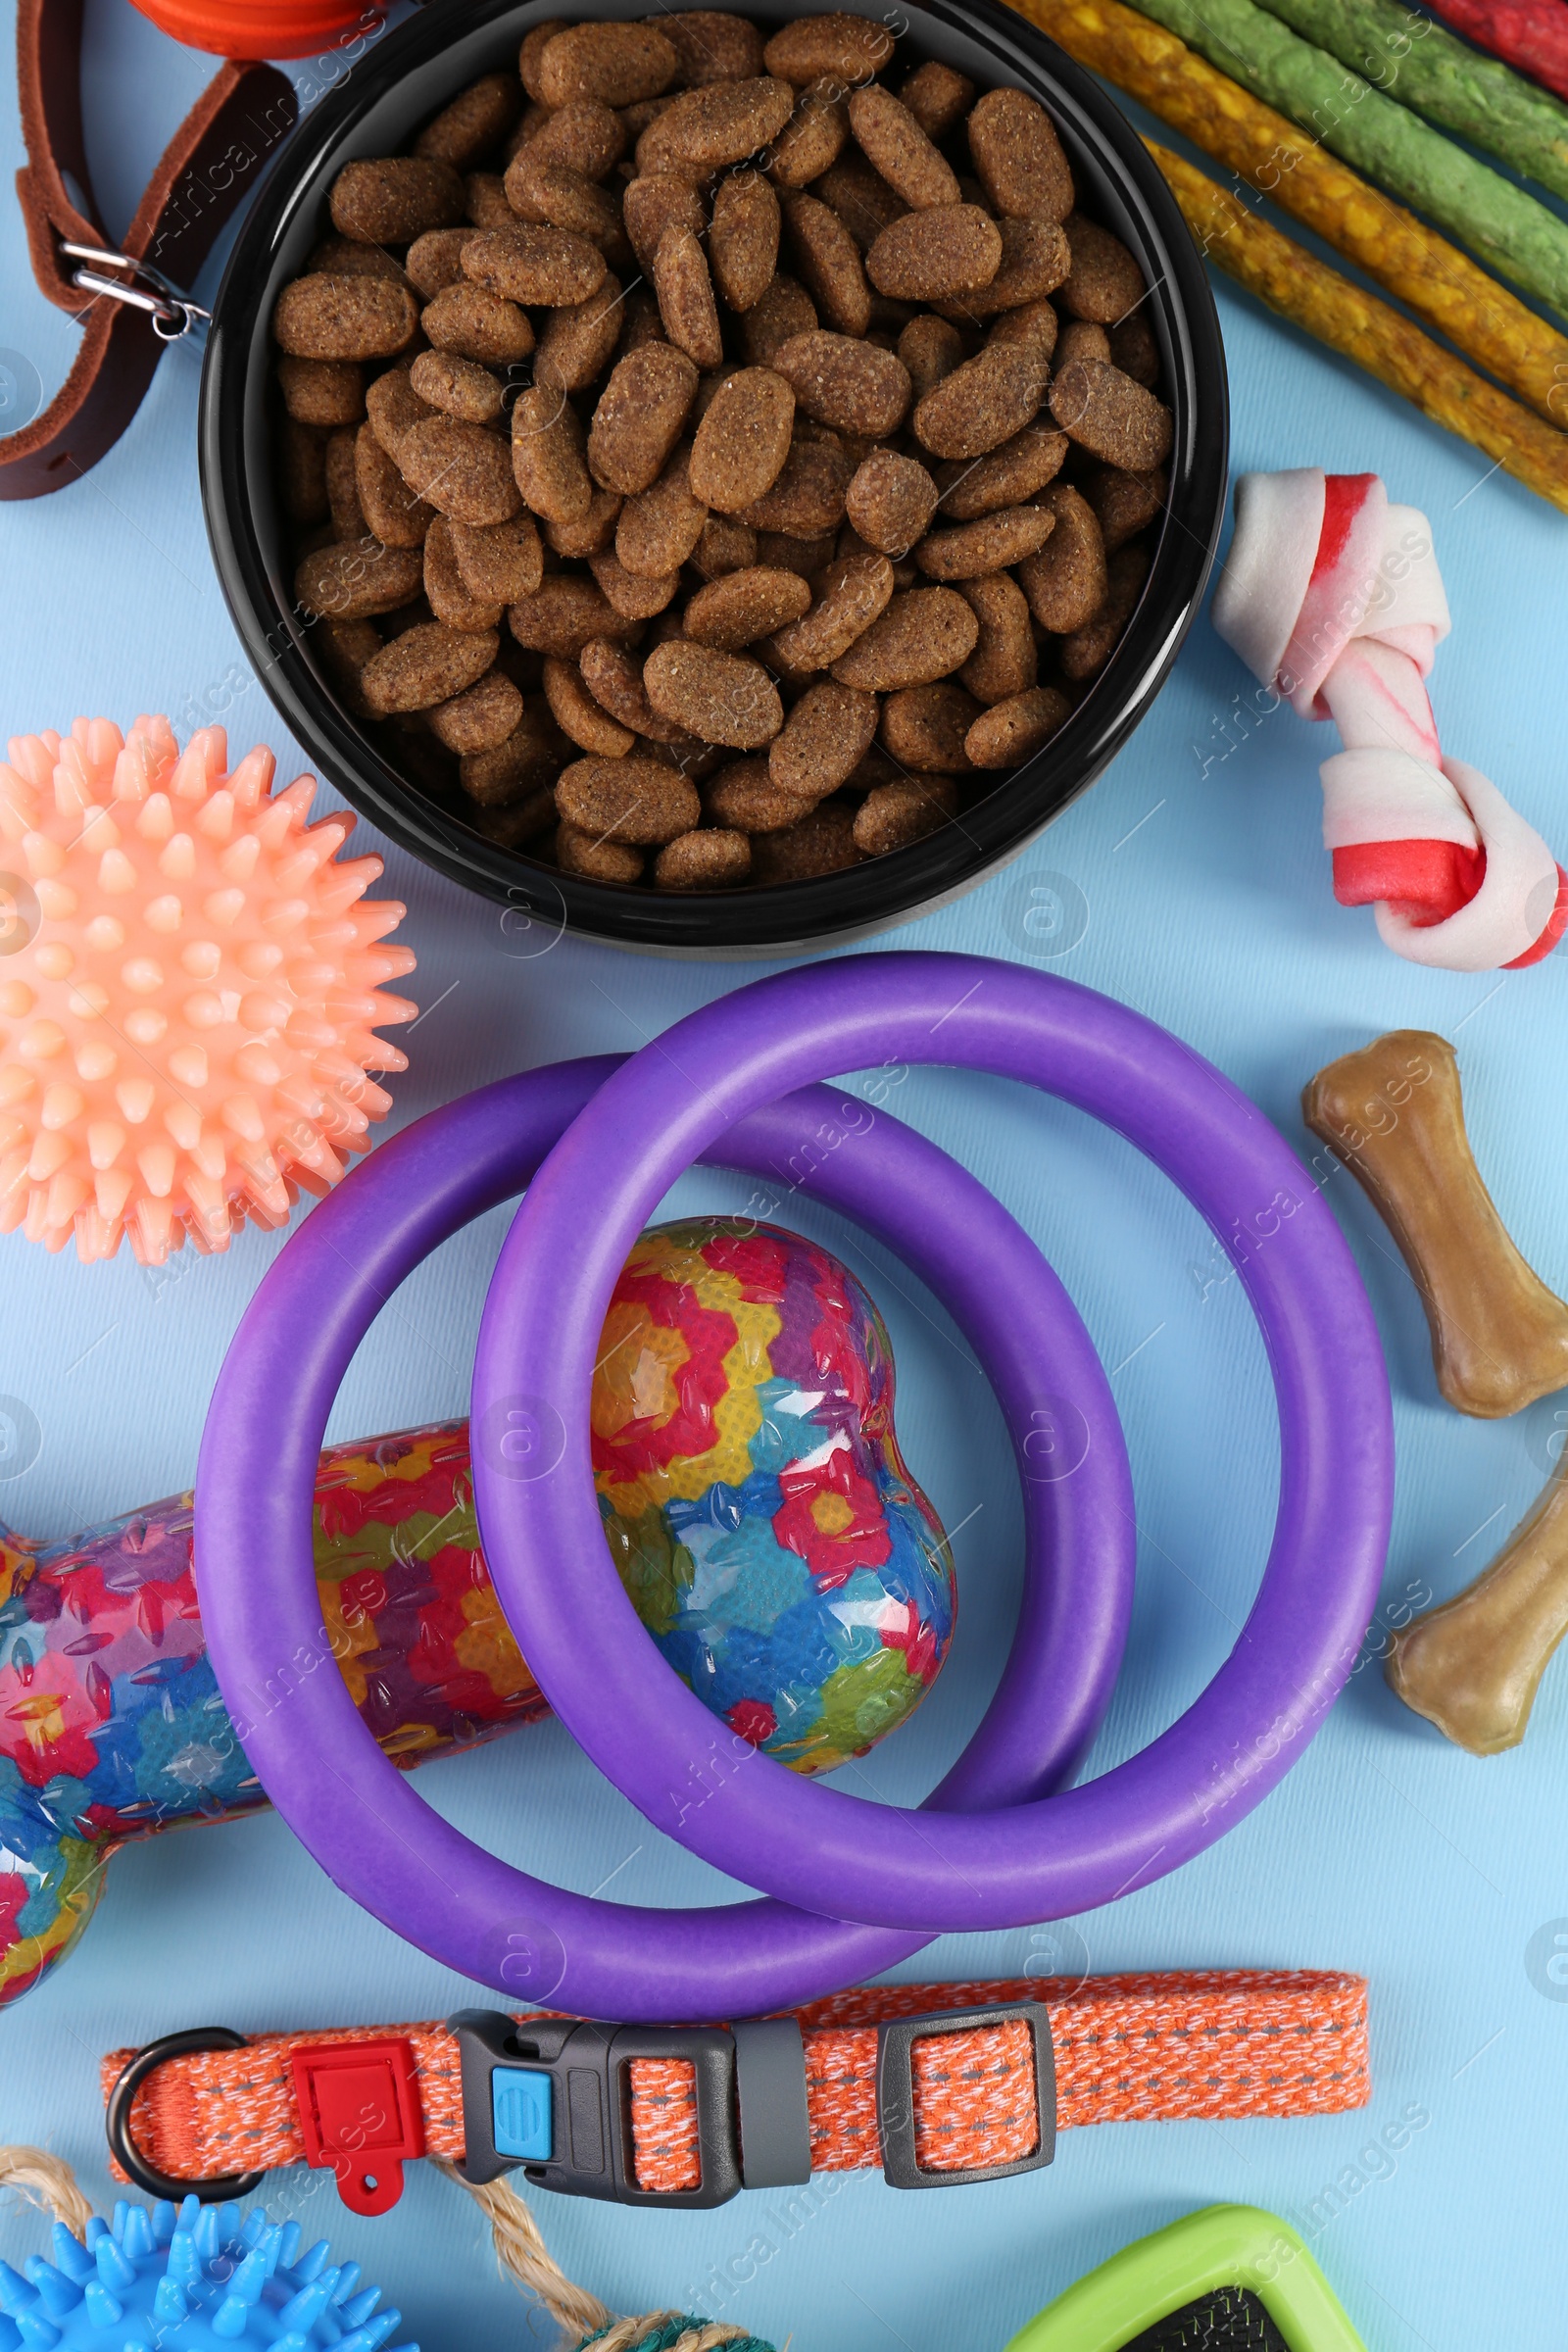 Photo of Dry pet food, toys and other goods on light blue background, flat lay. Shop items